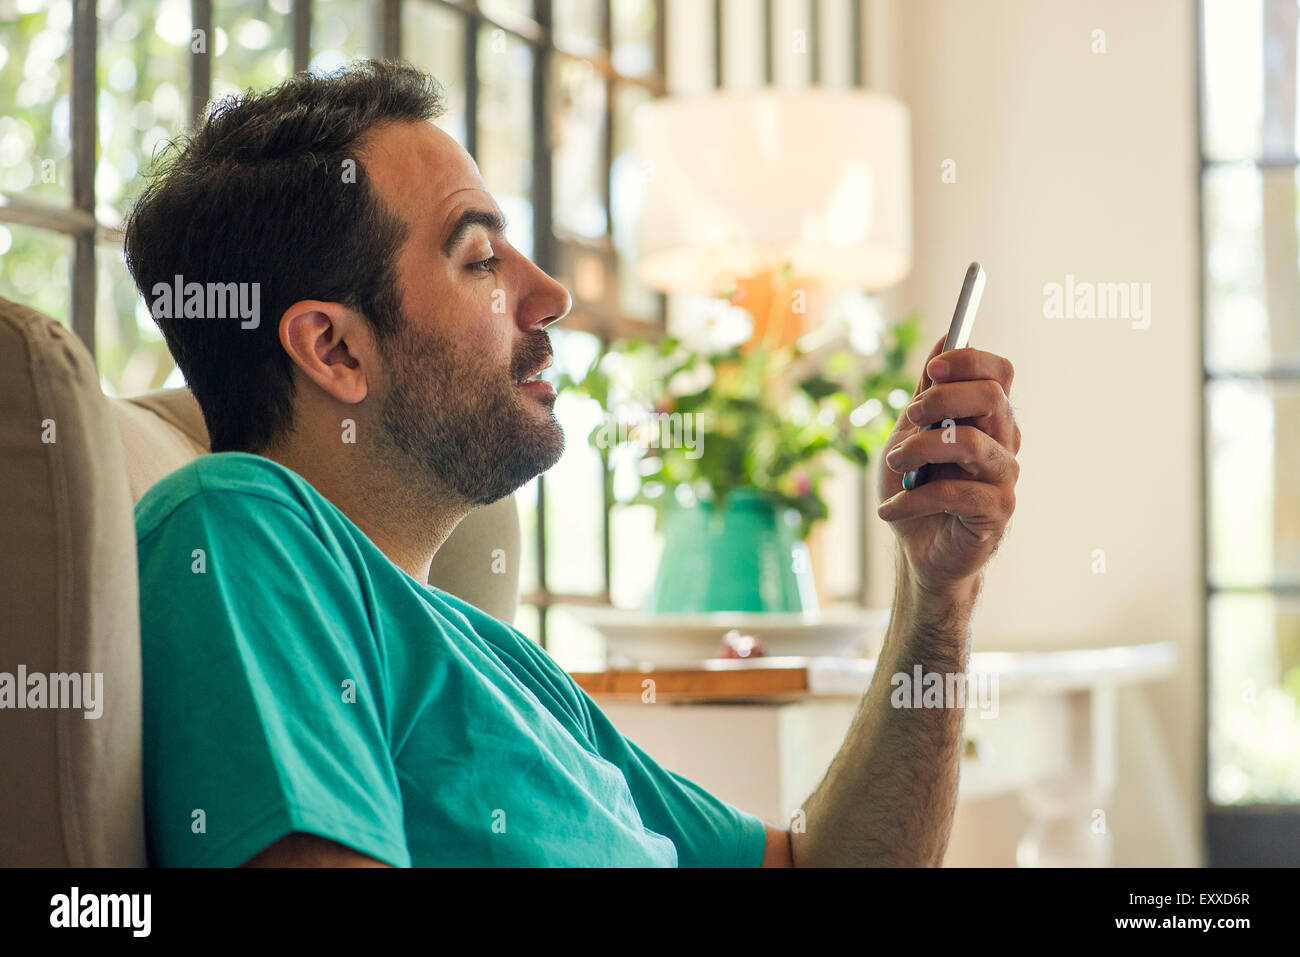 Man using smartphone Banque D'Images